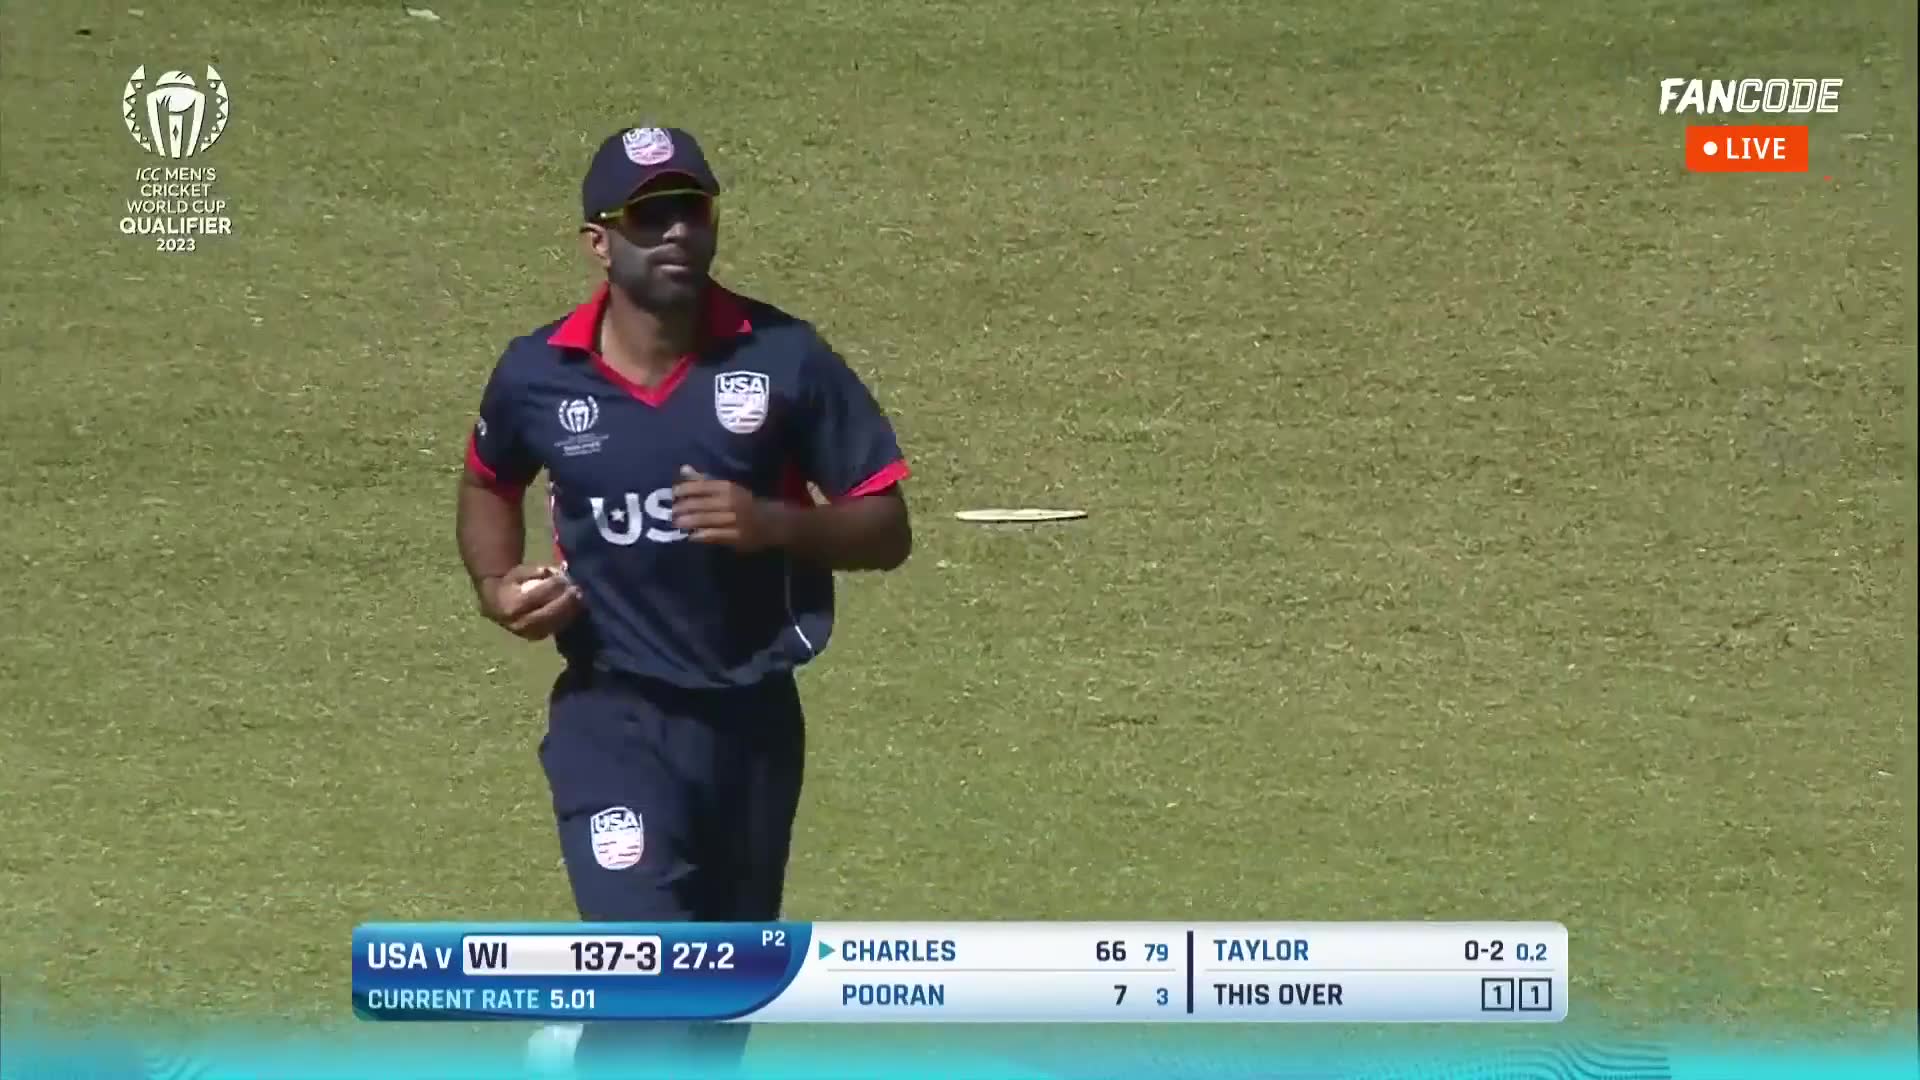 Wicket! Much Needed Wicket For USA, Johnson Charles Departs At 66